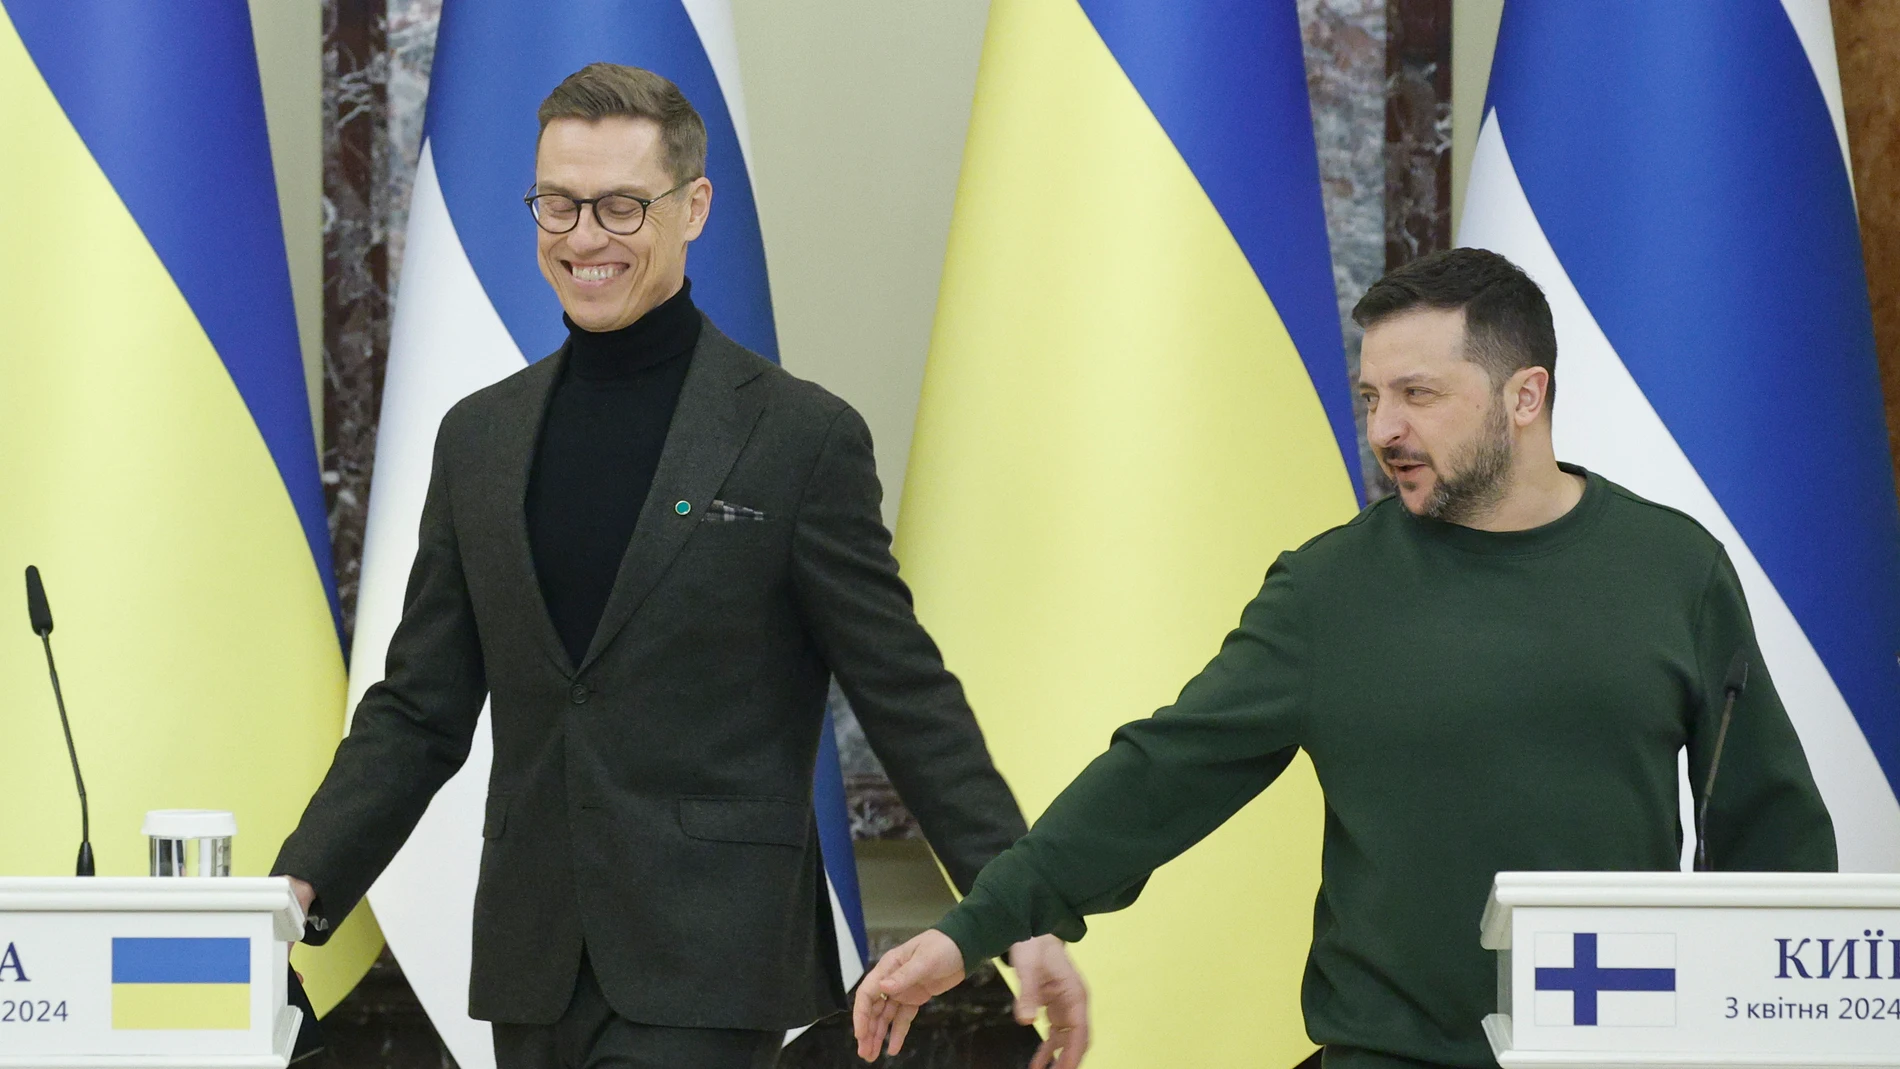 Kyiv (Ukraine), 03/04/2024.- Ukraine's President Volodymyr Zelensky (R) and his Finnish counterpart Alexander Stubb (L) arrive for a joint press conference after their meeting in Kyiv, Ukraine, 03 April 2024. Stubb arrived in Kyiv to meet with top Ukrainian officials amid the Russian invasion. (Finlandia, Rusia, Ucrania, Kiev) EFE/EPA/SERGEY DOLZHENKO 